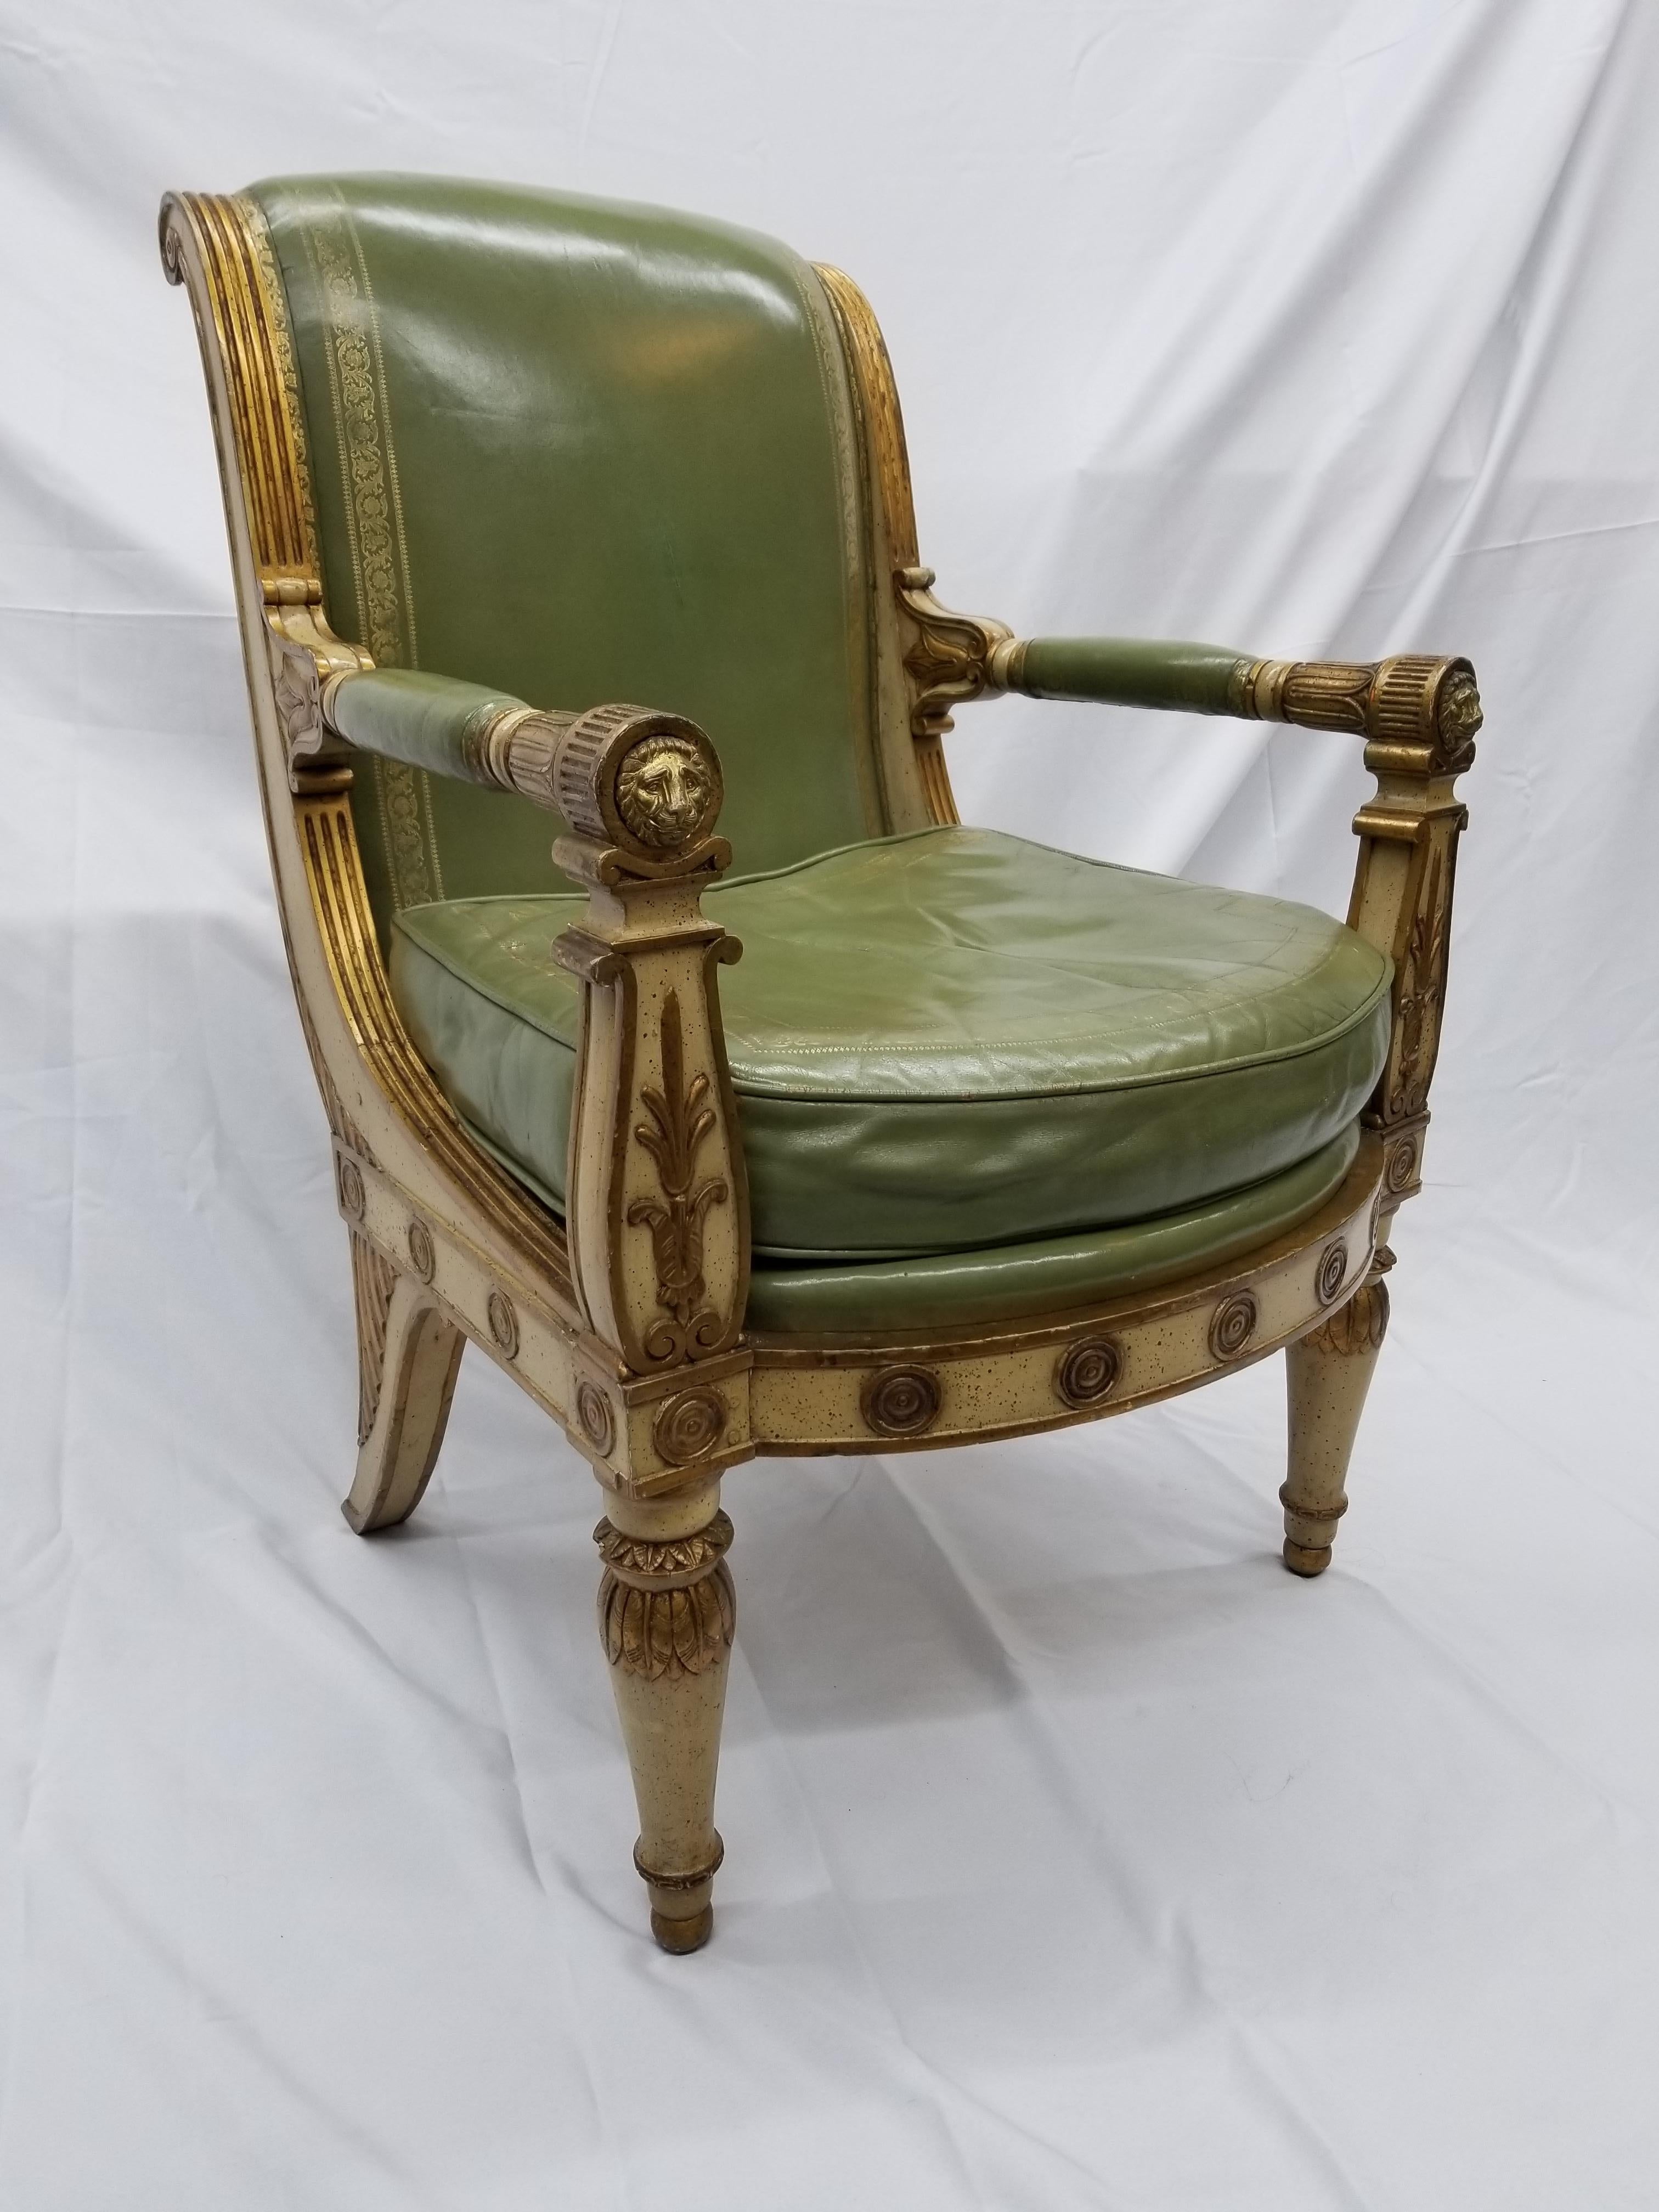 An extremely rare and beautiful set of royal throne-armchairs, perfect for the estate dining room (this set itself was originally owned by the owners of Seagram beverages). Each chair is crafted carefully, from wood and leather, and embossed with